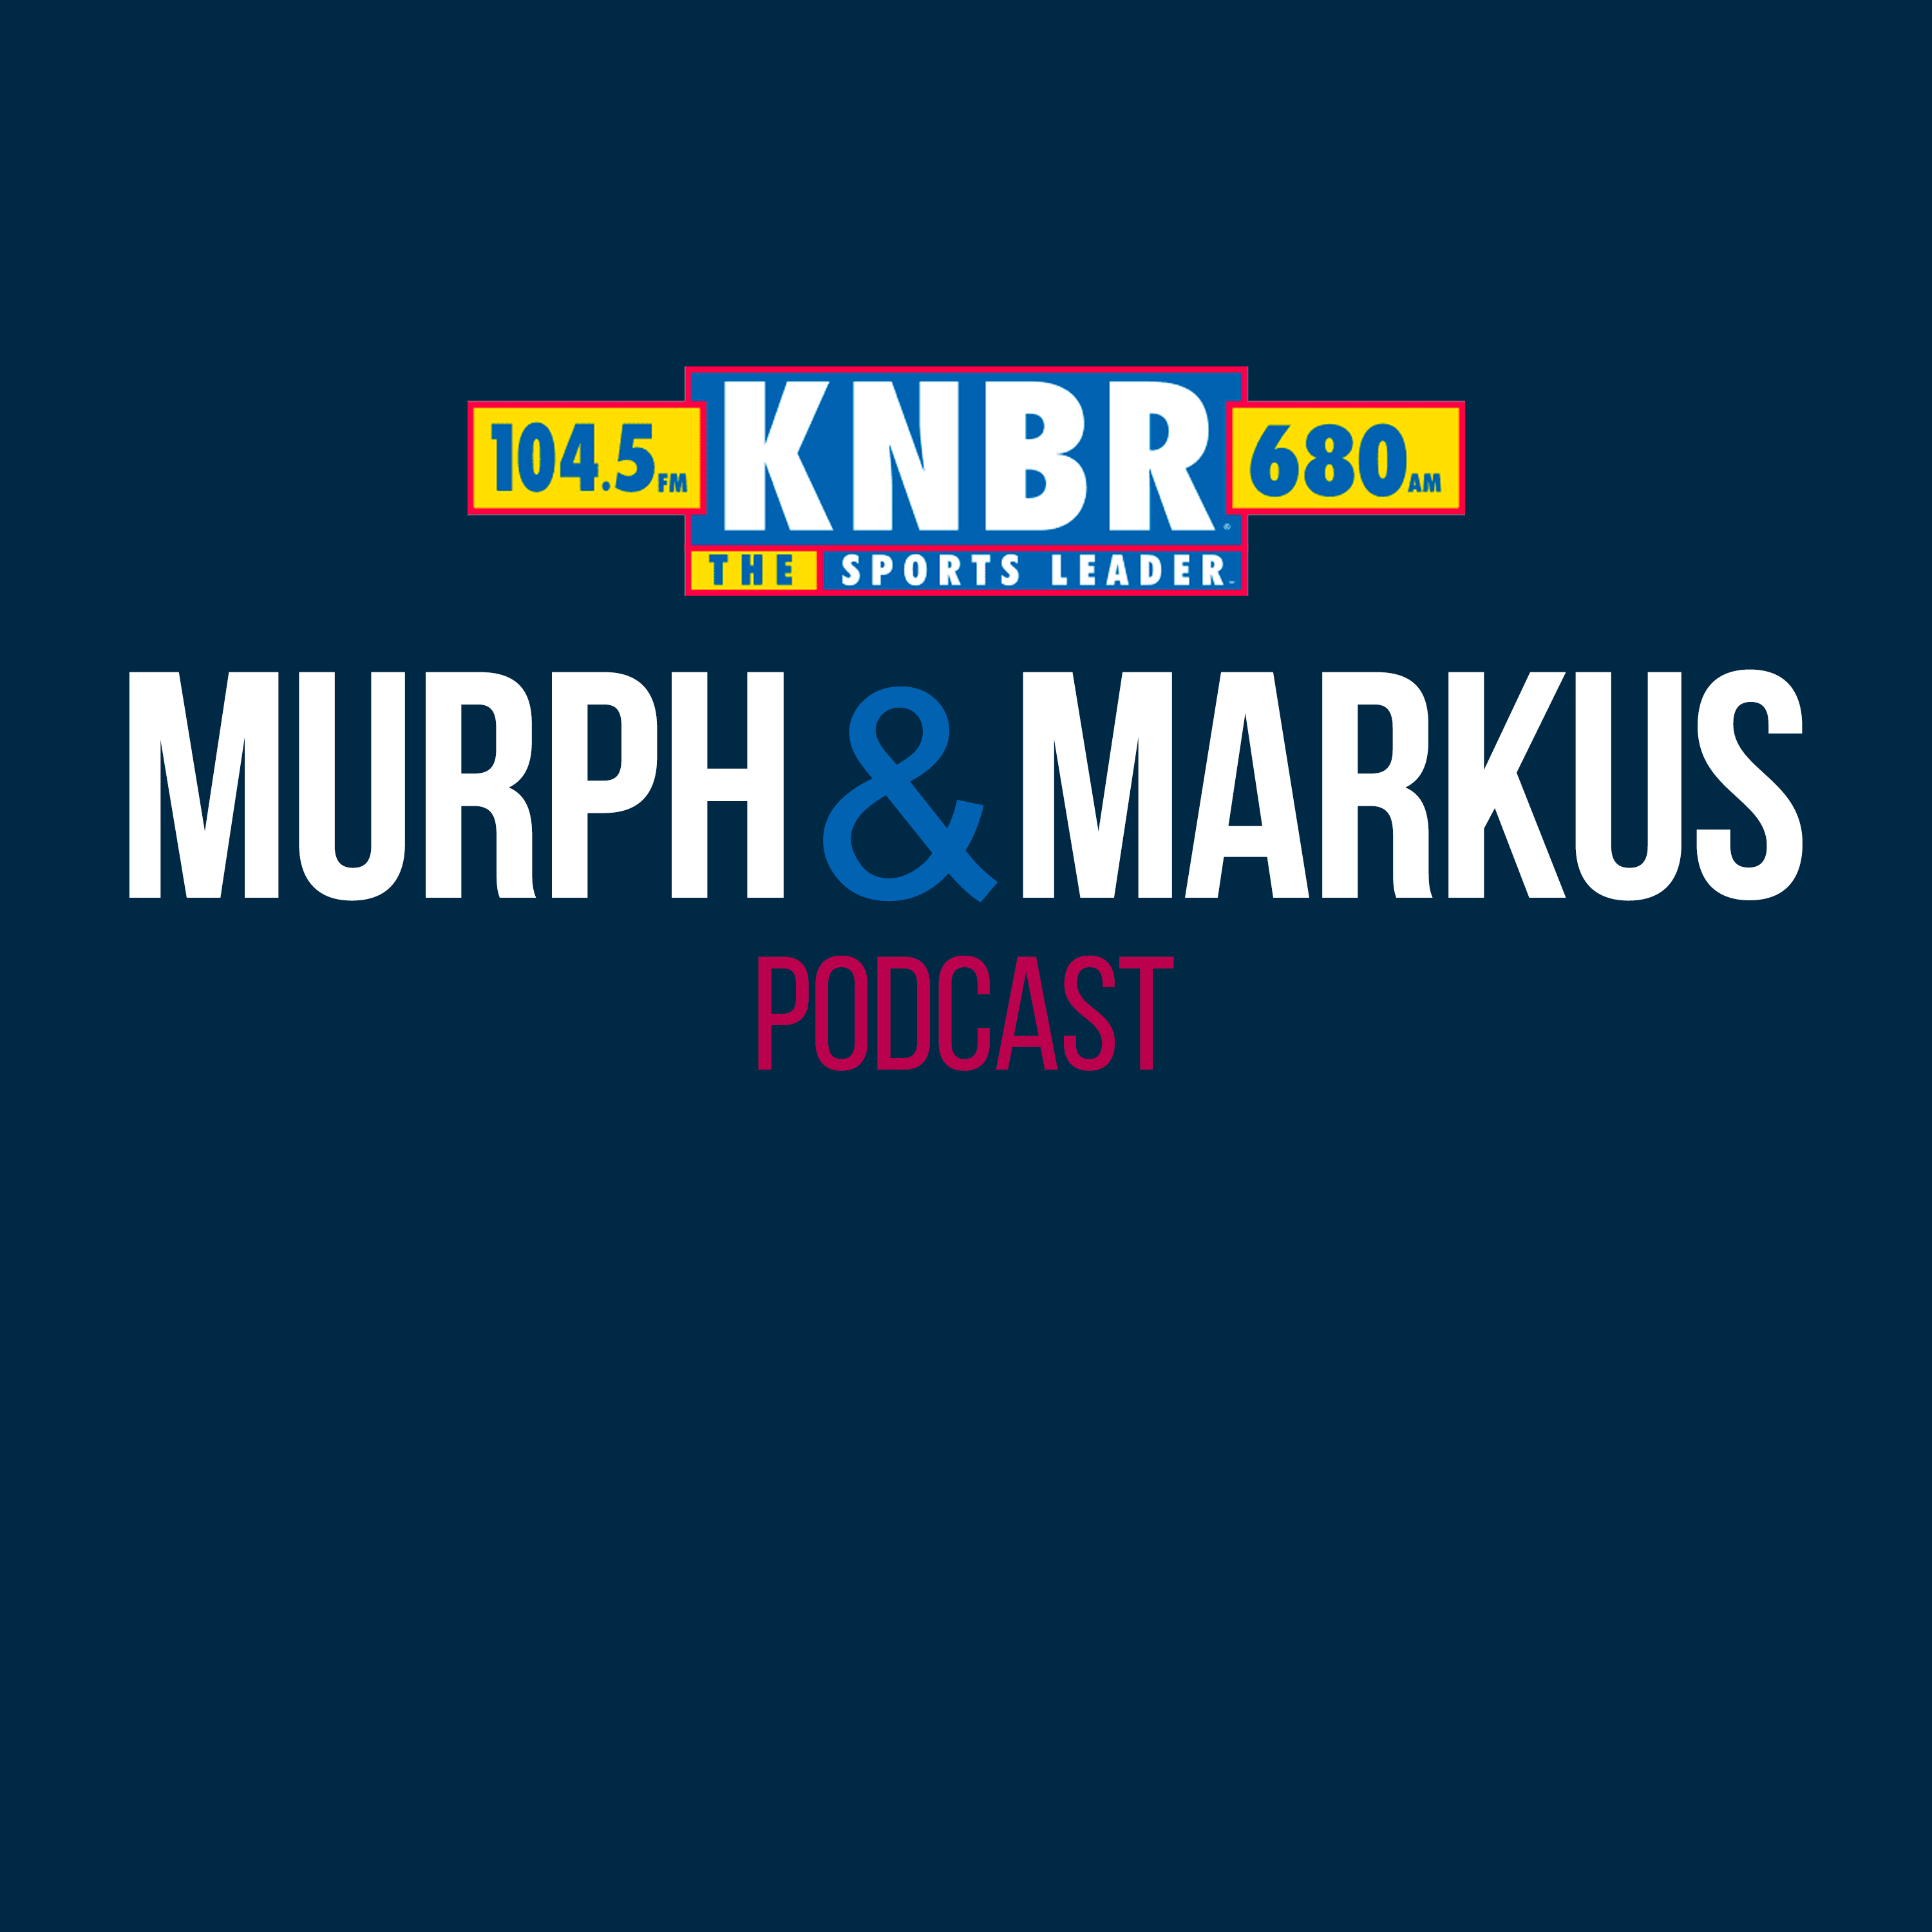 8-1 Hour 4: Murph & Markus react to Brock Purdy's comments about dominating games like Tom Brady, talk to Tim Flannery, & close the show